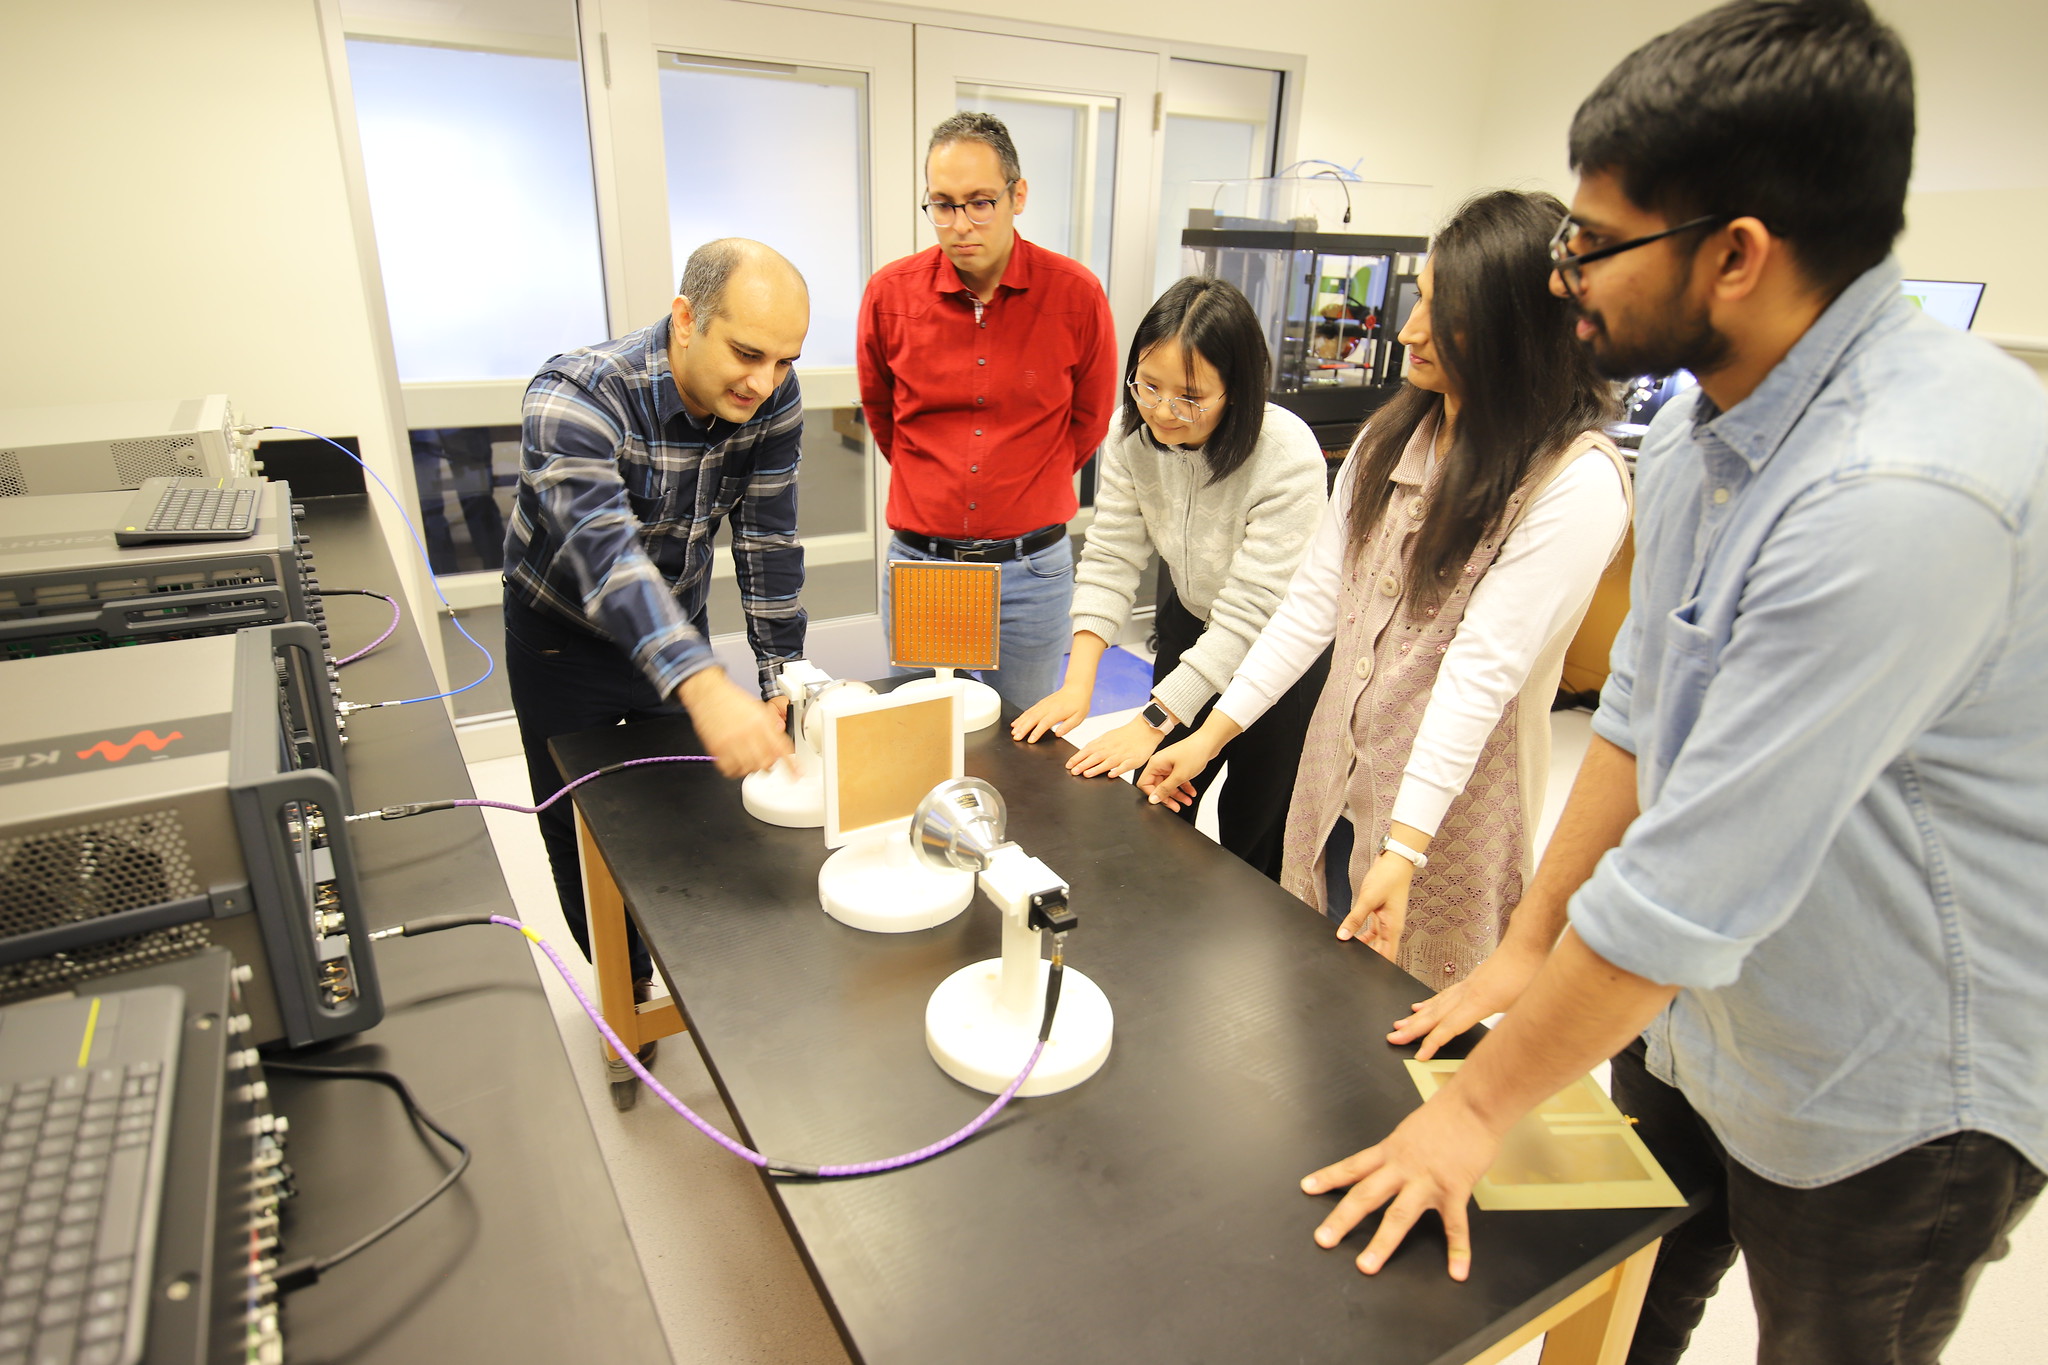 Professor and students gathered around a table working with scientific equipment.